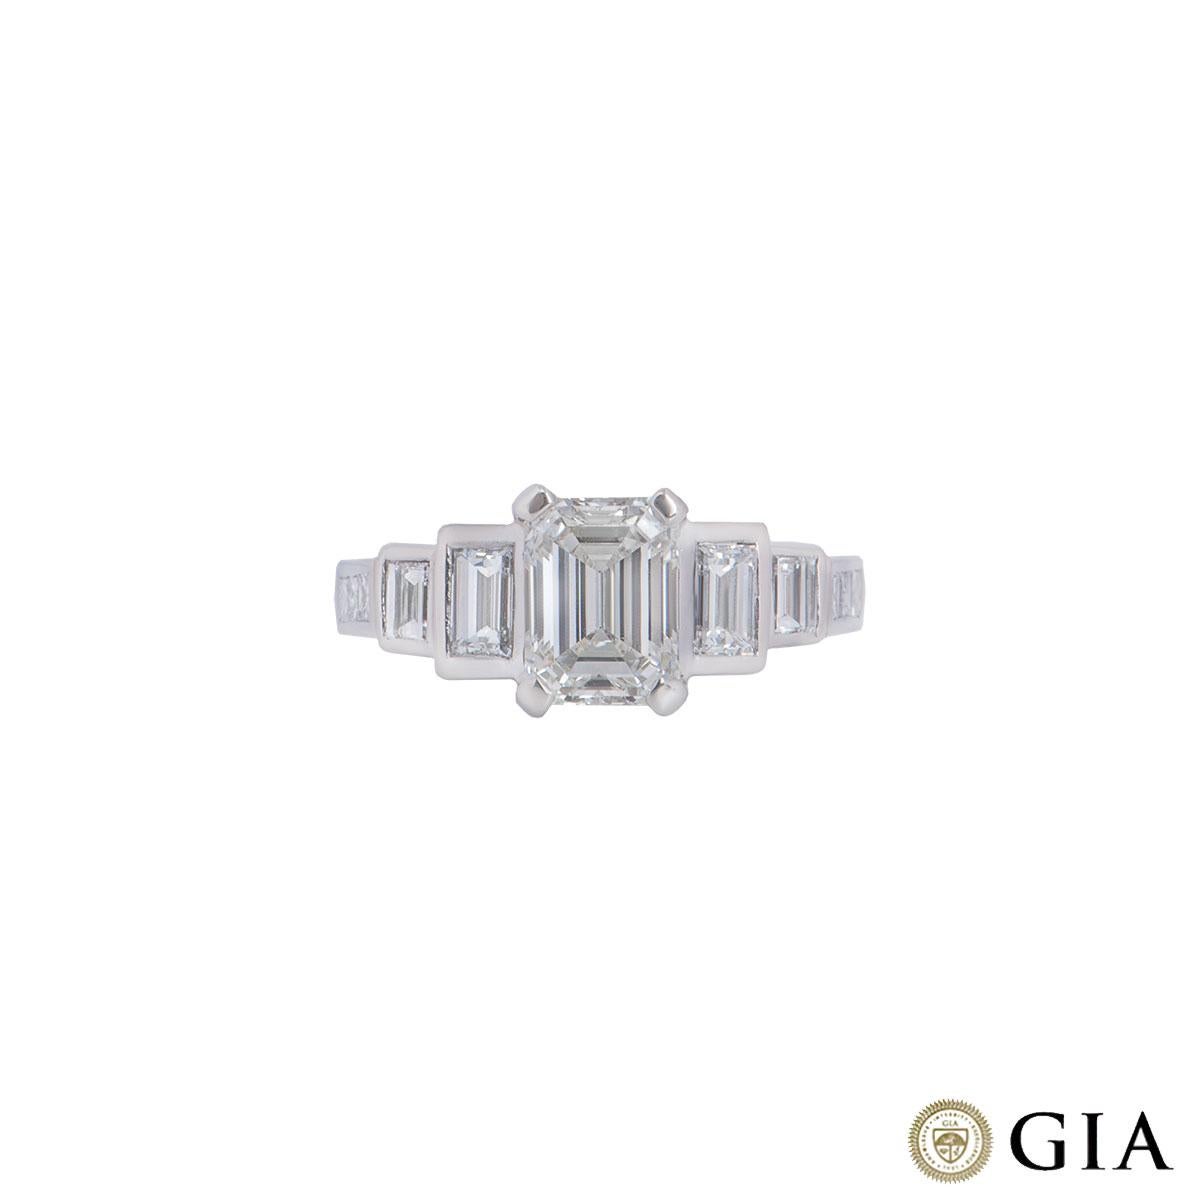 A platinum emerald cut diamond ring. The ring features an emerald cut diamond as the centre stone with 4 baguette and 6 princess cut diamonds beside on the shoulders. The emerald cut diamond has a weight of 1.52ct with J colour and VS1 clarity. The